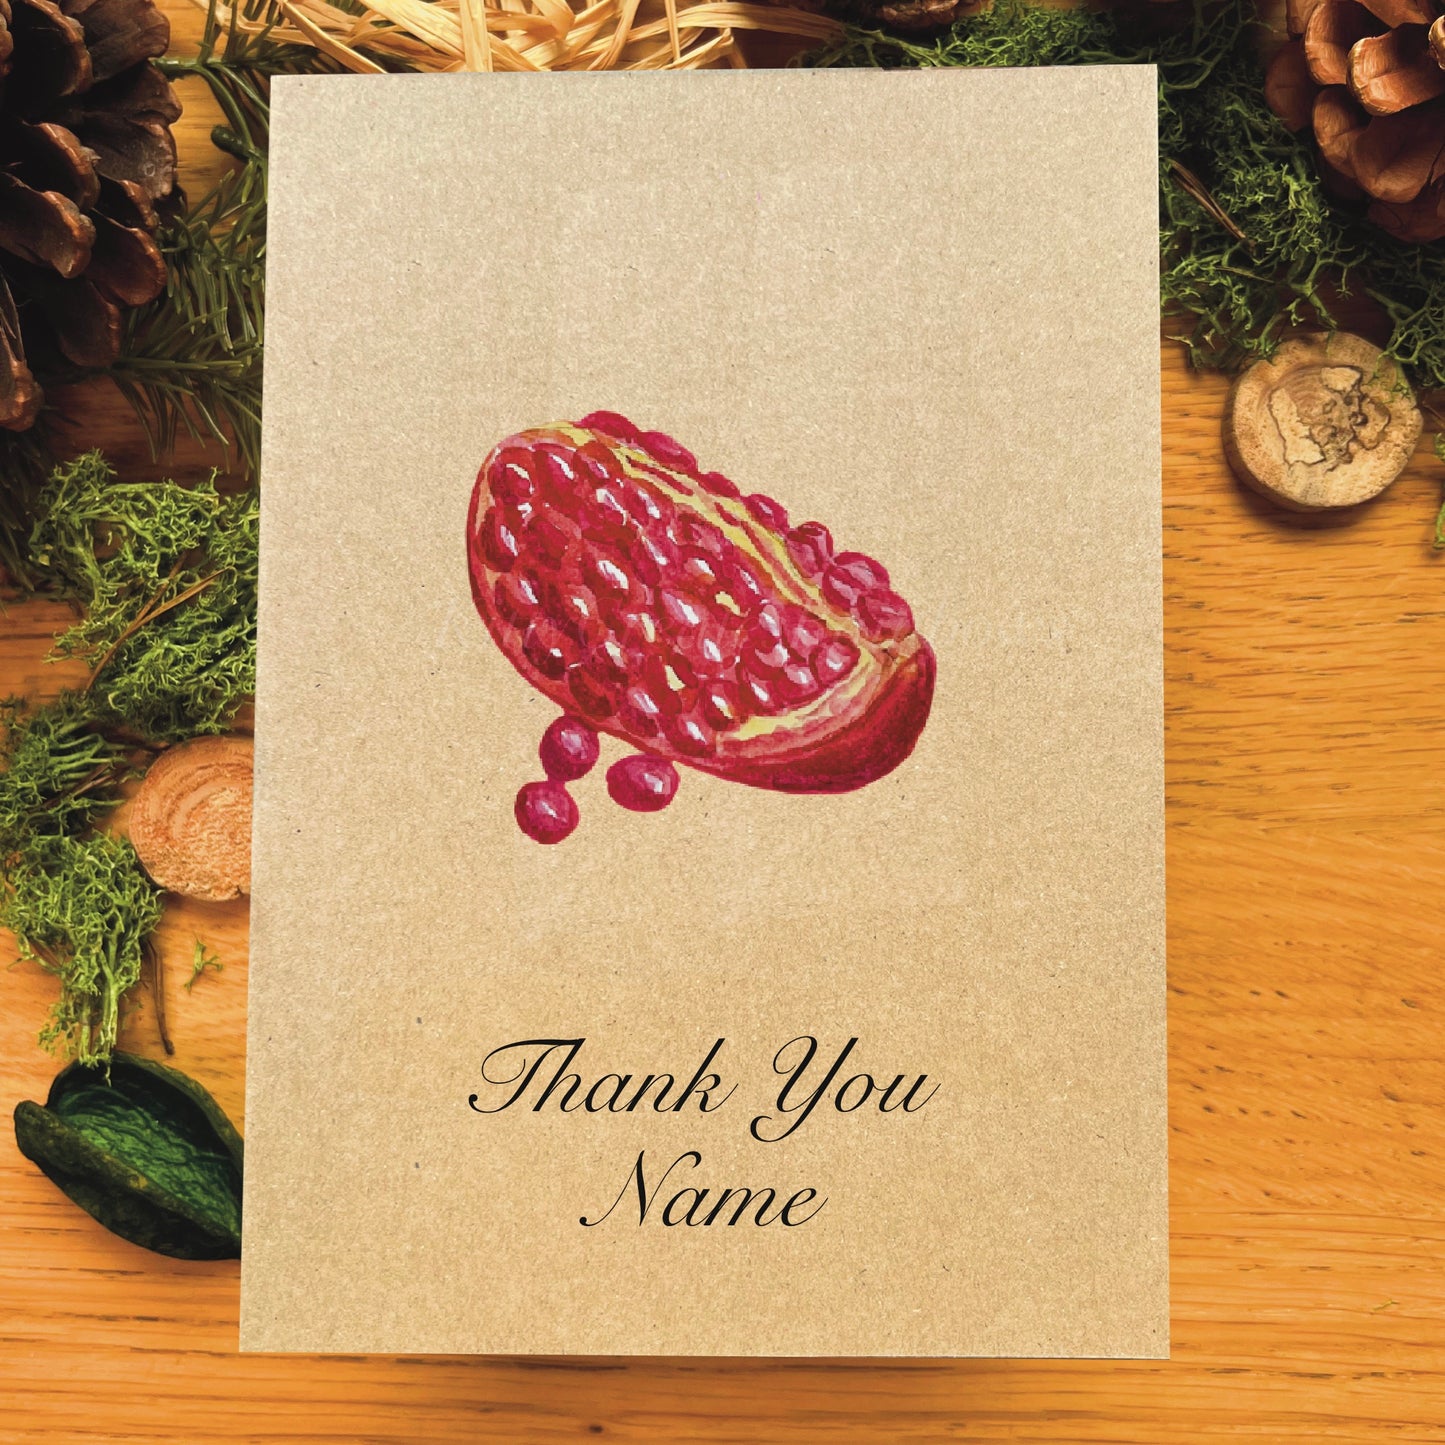 Pomegranate slice watercolour illustrated Manila recycled card with sample Thank You Name text in script